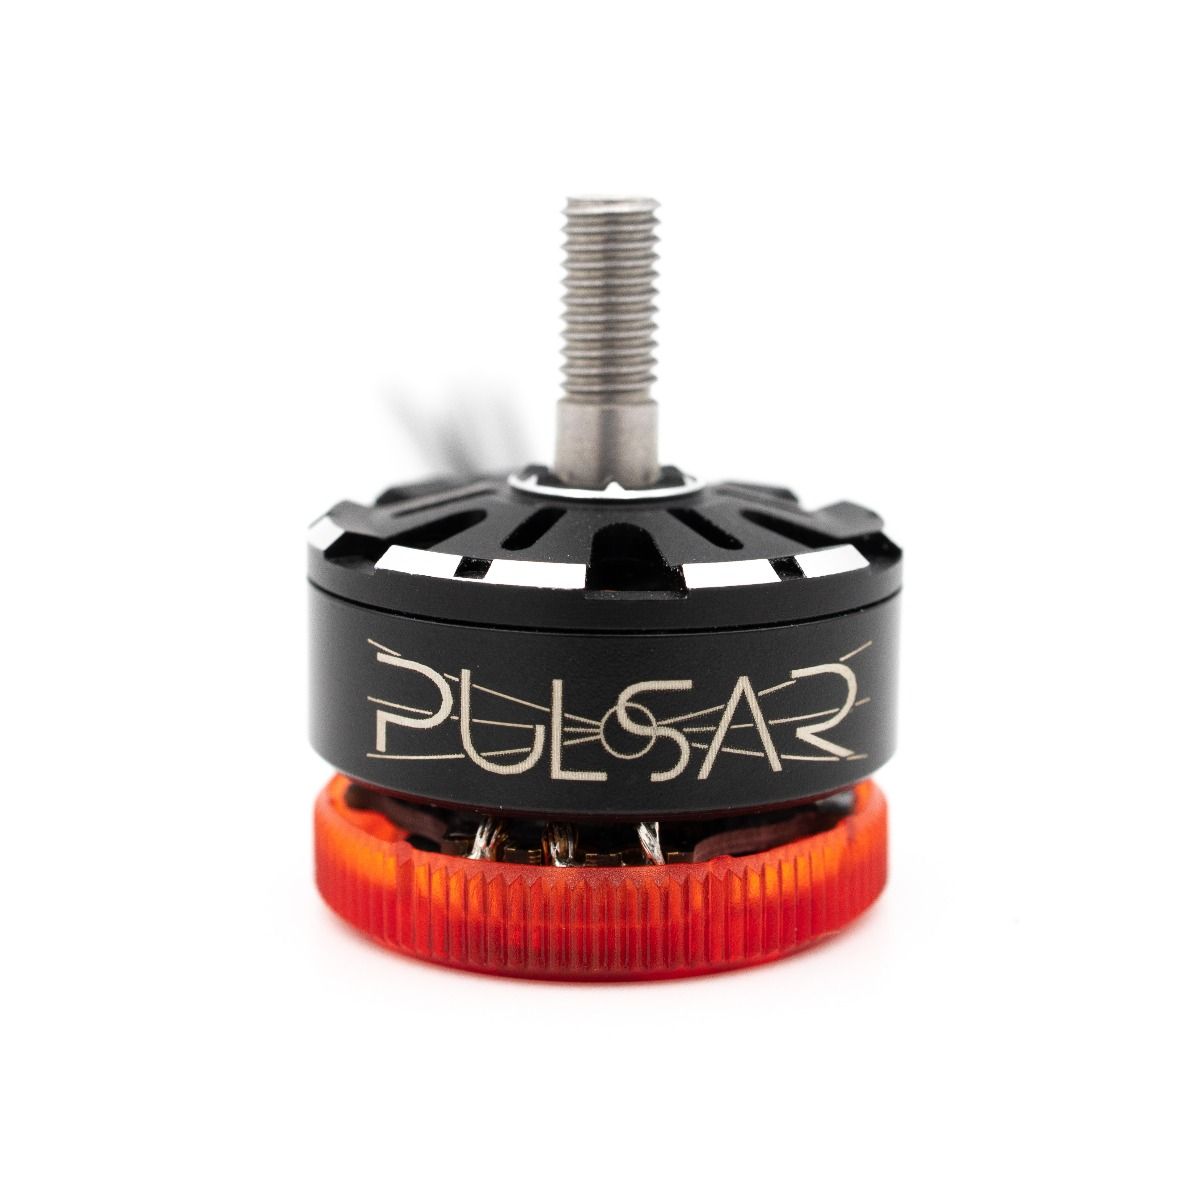 Brushless Motor EMAX Pulsar 2207 with LED 1750kv 3-6s for RC Drone